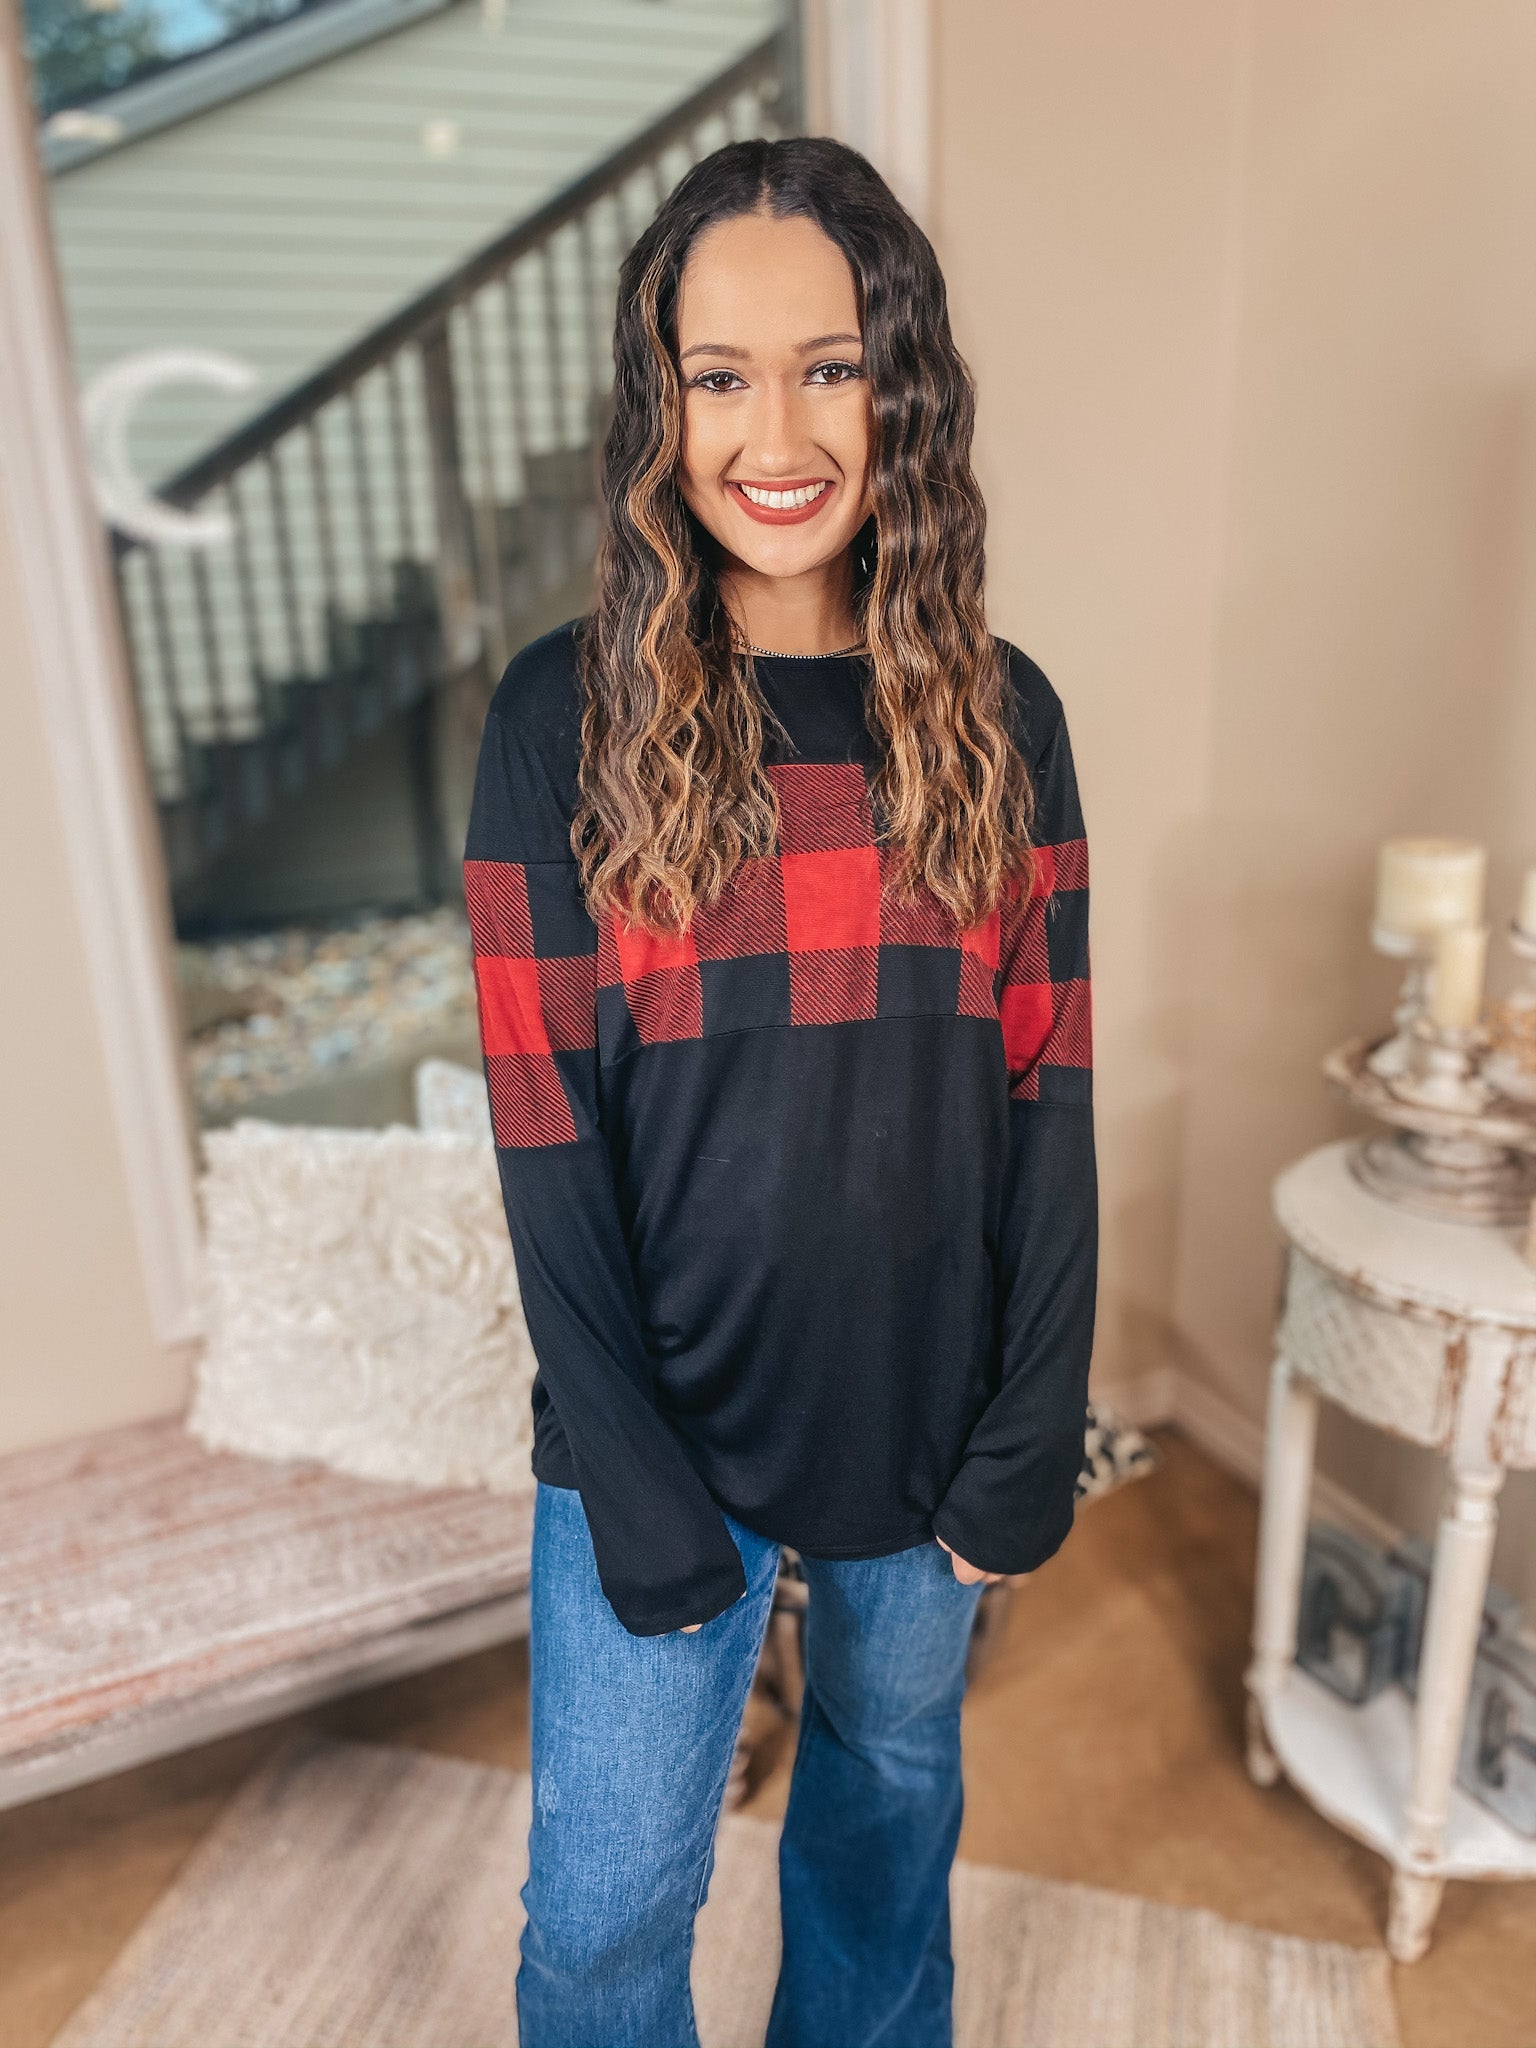 One Way Ticket North Buffalo Plaid Bust Long Sleeve Top in Red and Black - Giddy Up Glamour Boutique